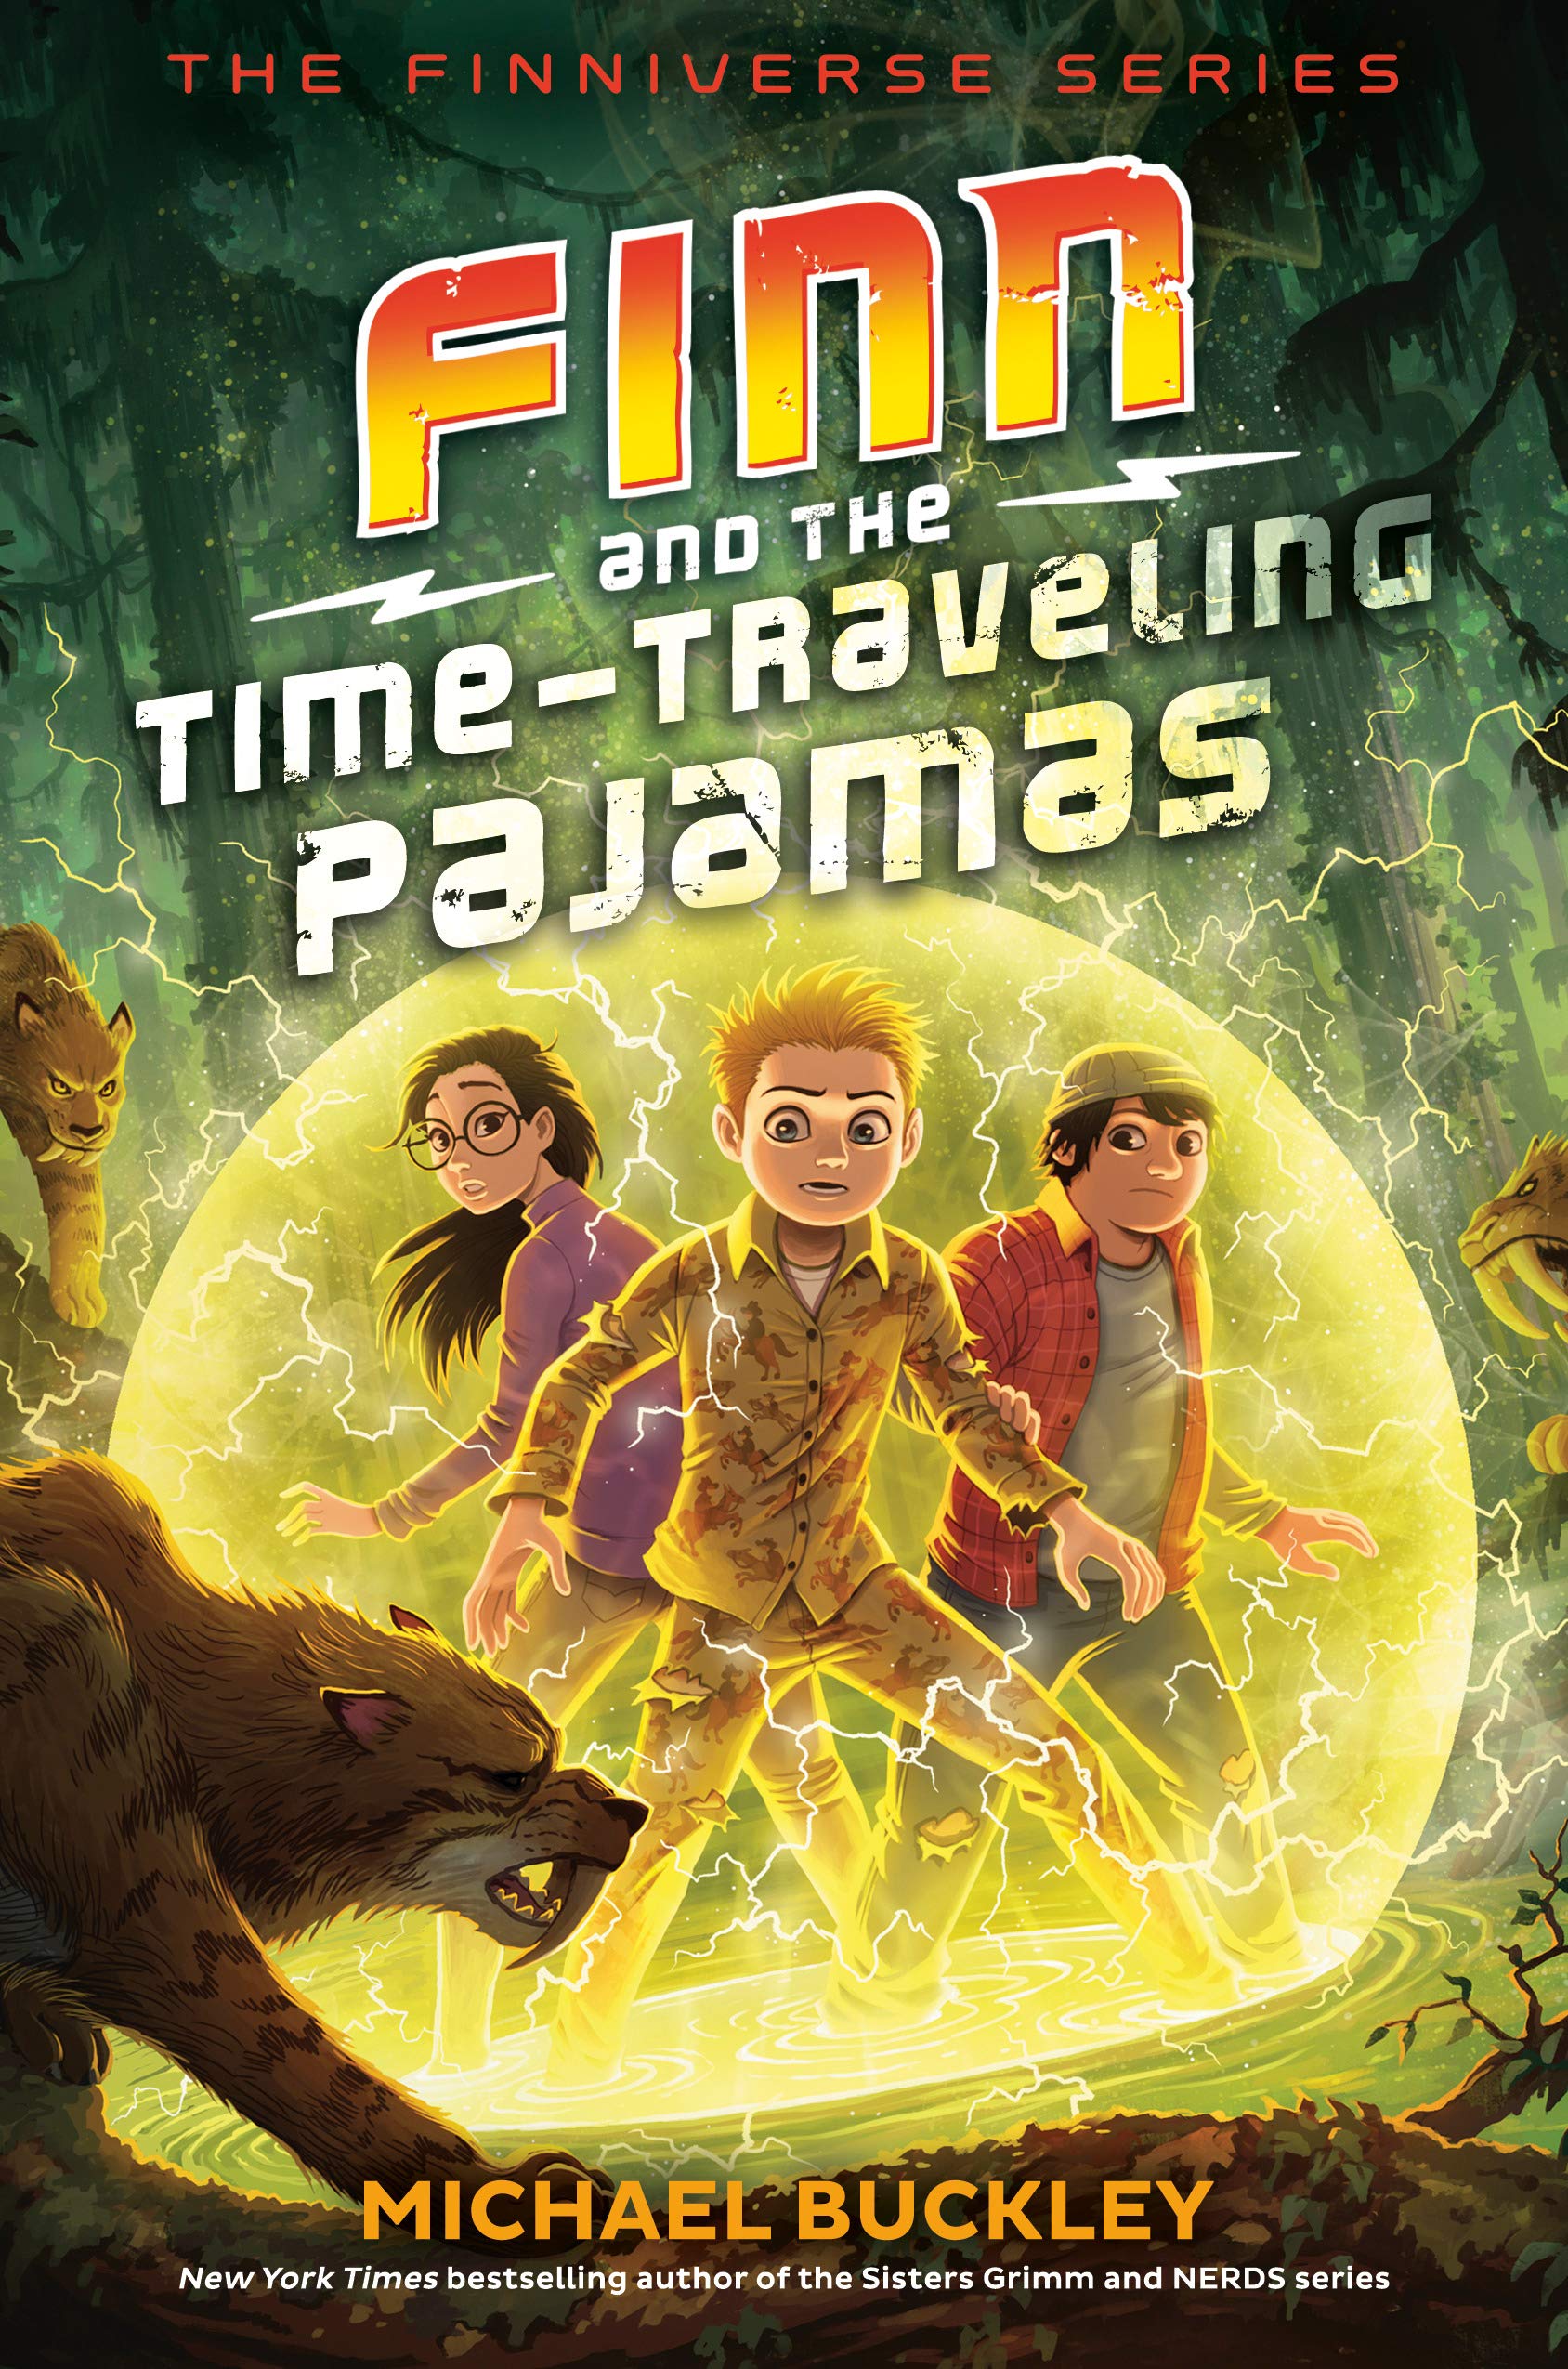 Finn and the Time-Traveling Pajamas (The Finniverse Book 2) by Michael Buckley